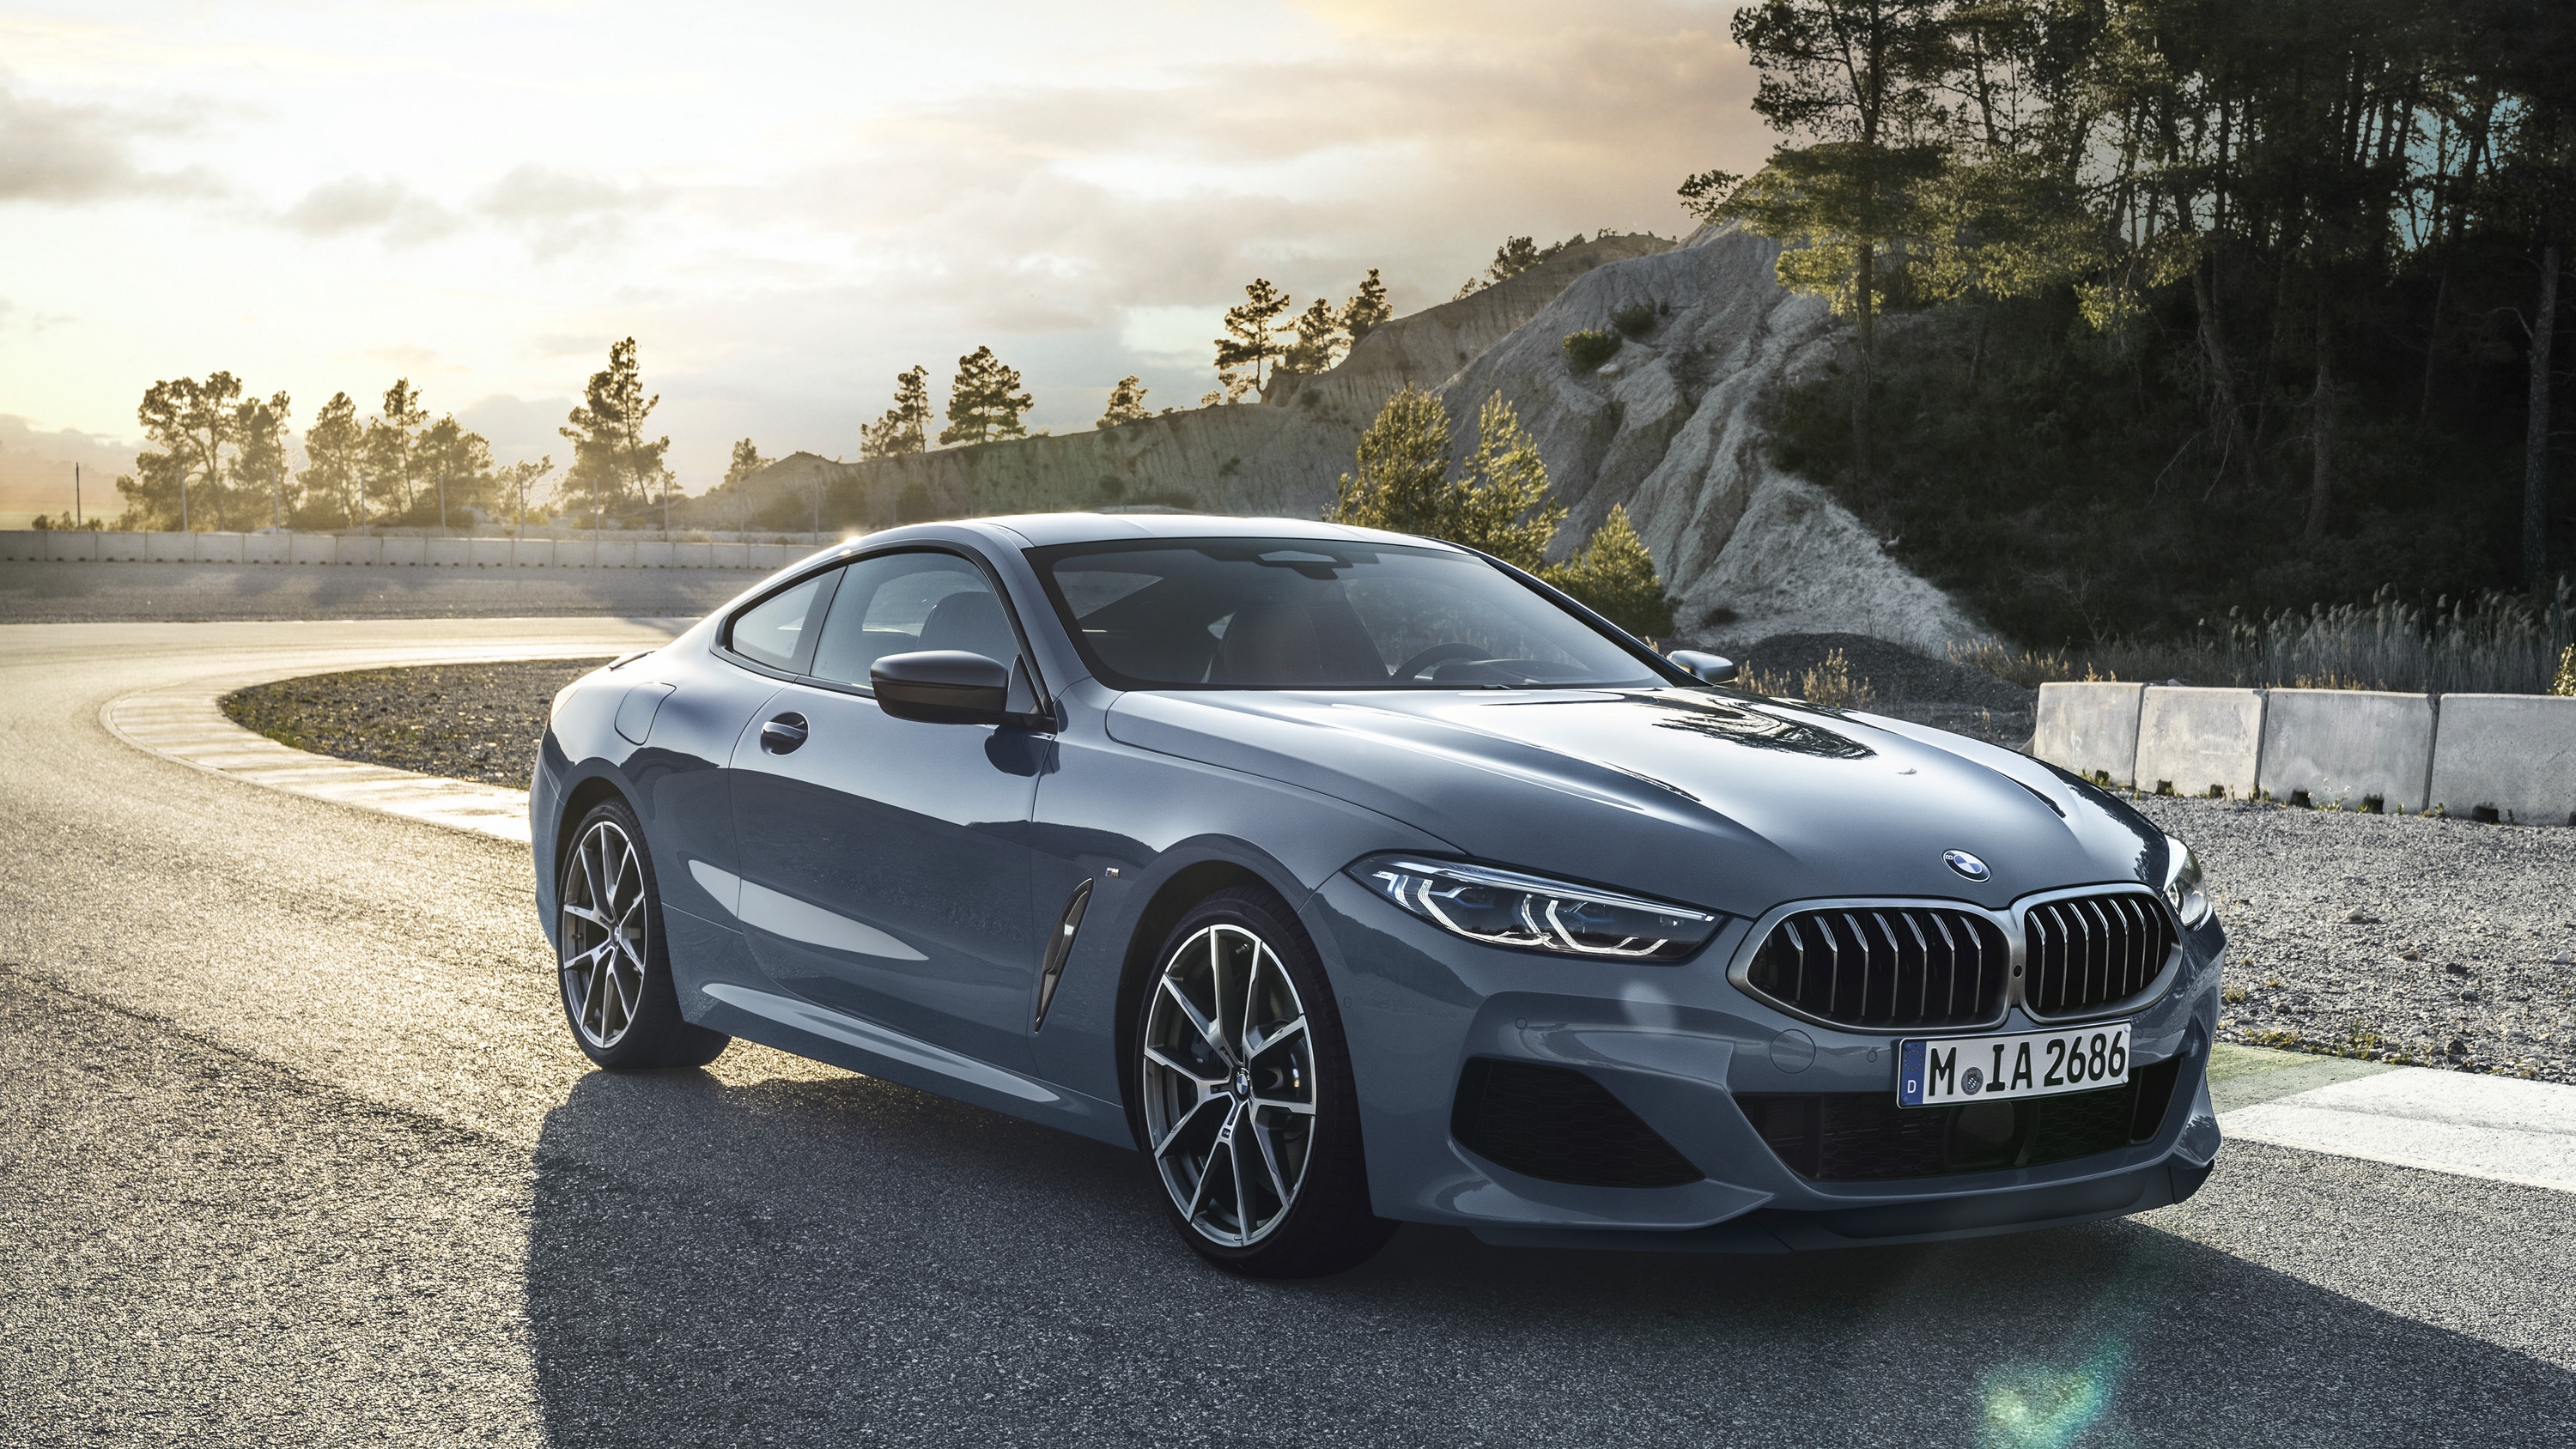 2019 Bmw 8 Series Pictures, Photos, Wallpapers - Bmw 8 Series 2019 , HD Wallpaper & Backgrounds